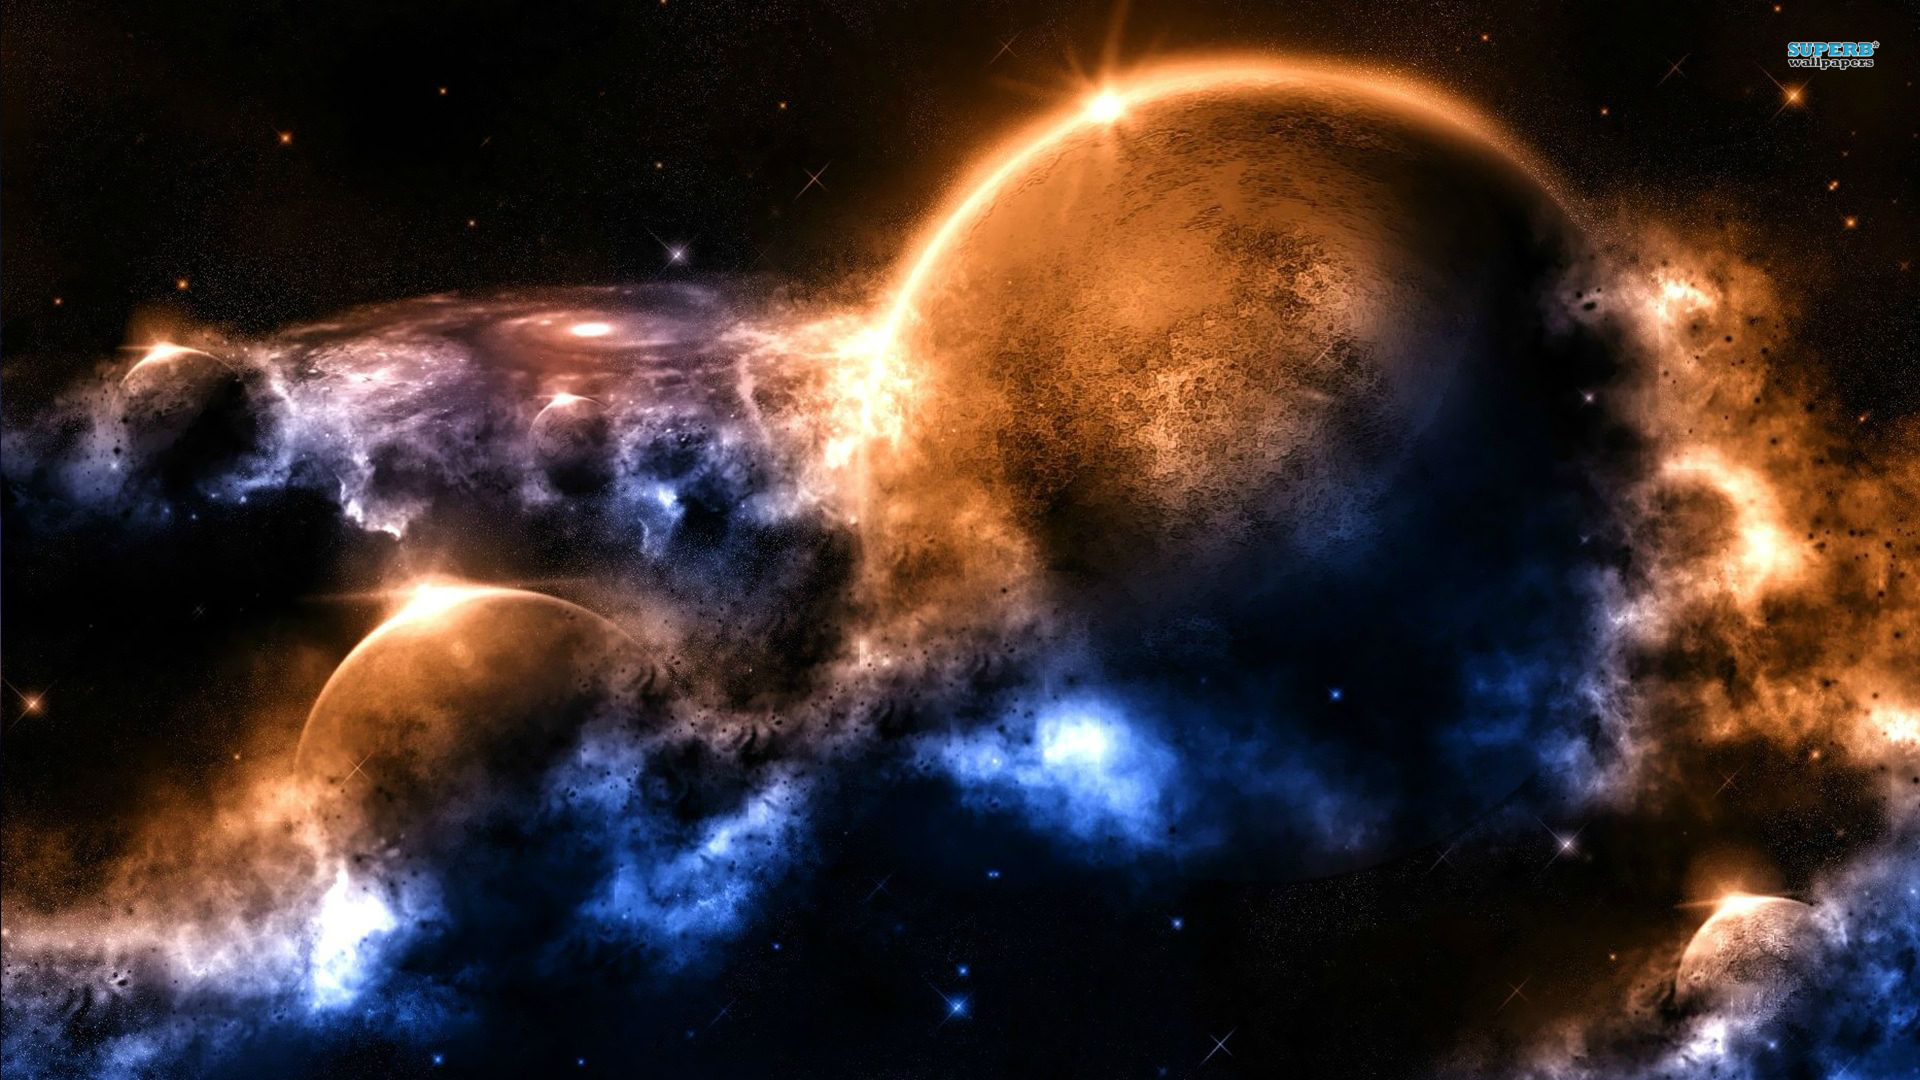 Outer Space wallpaper | 1920x1080 | #56389